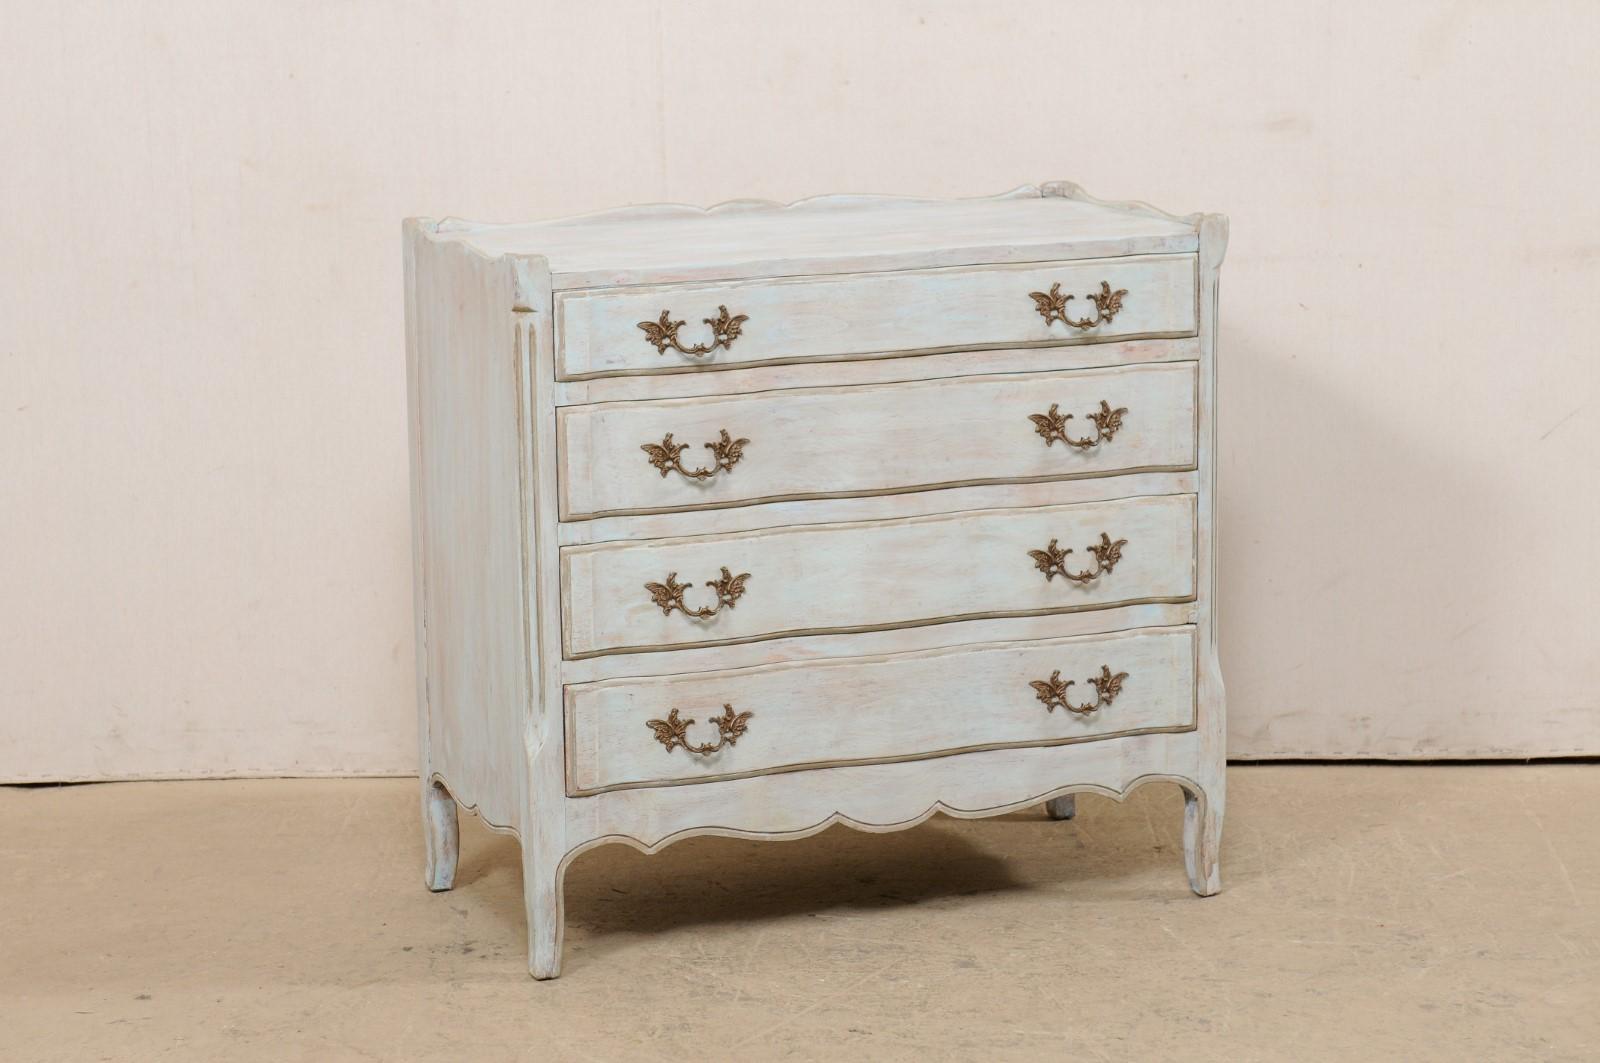 An American carved and painted wood four-drawer chest from the mid 20th century. This vintage American chest features a rectangular-shaped top with sweetly scalloped raised lip along the sides and back, atop a case which houses four drawers, each